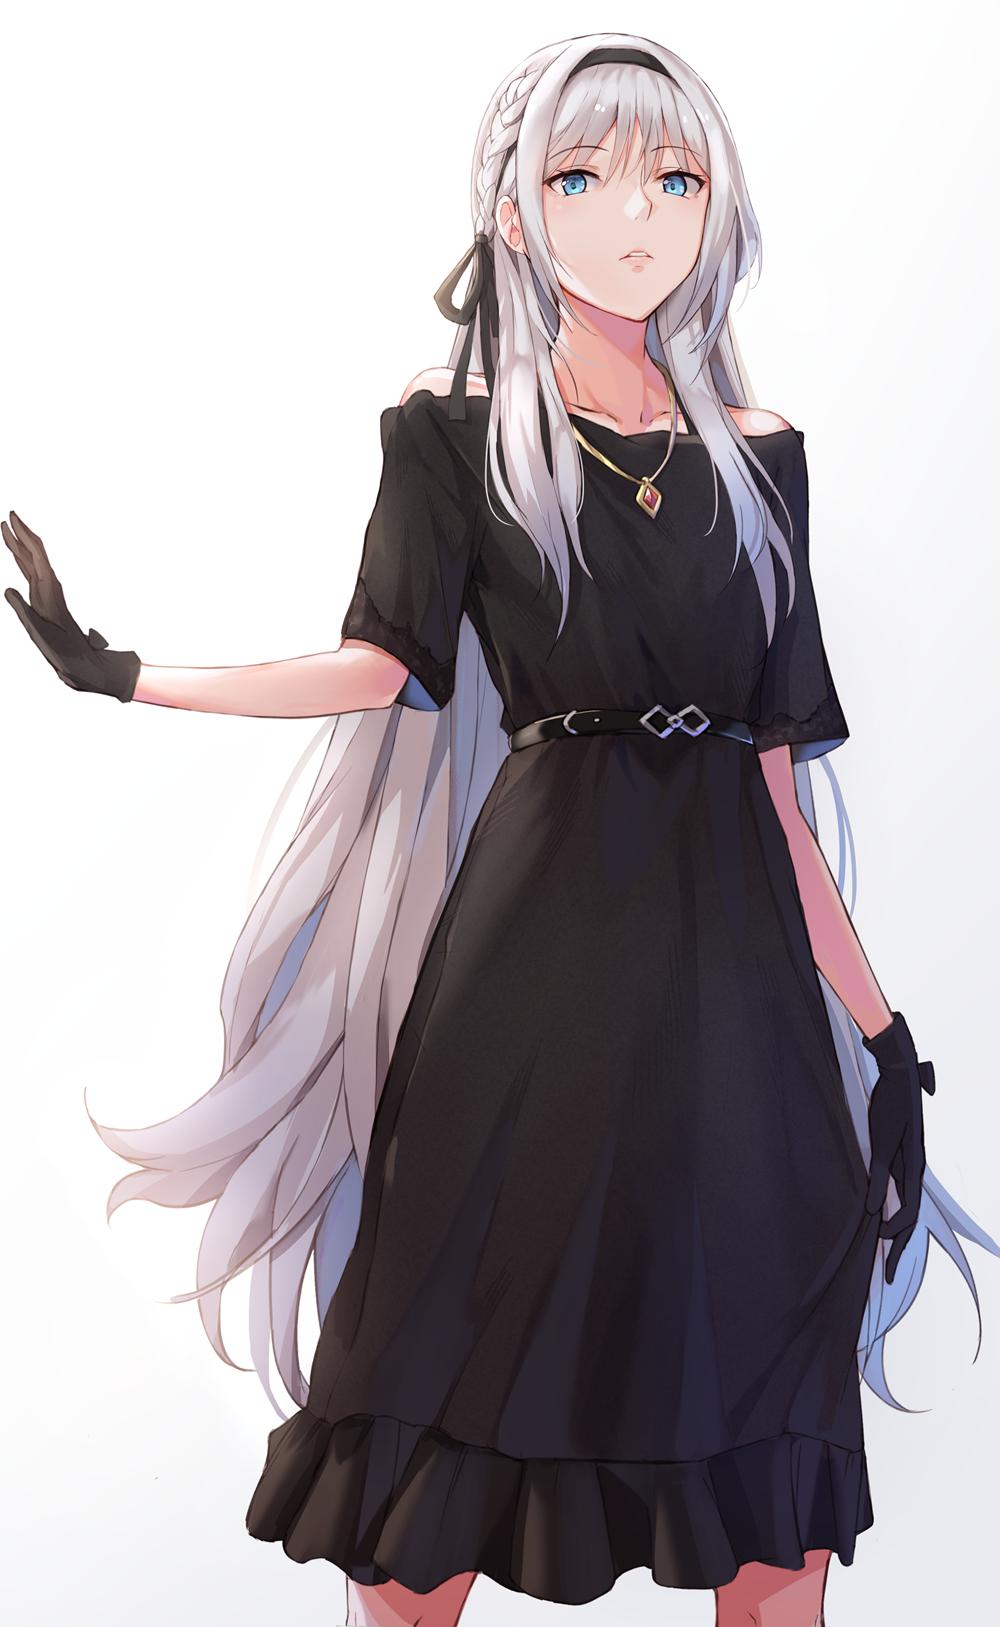 AN-94 in her orchestral garment